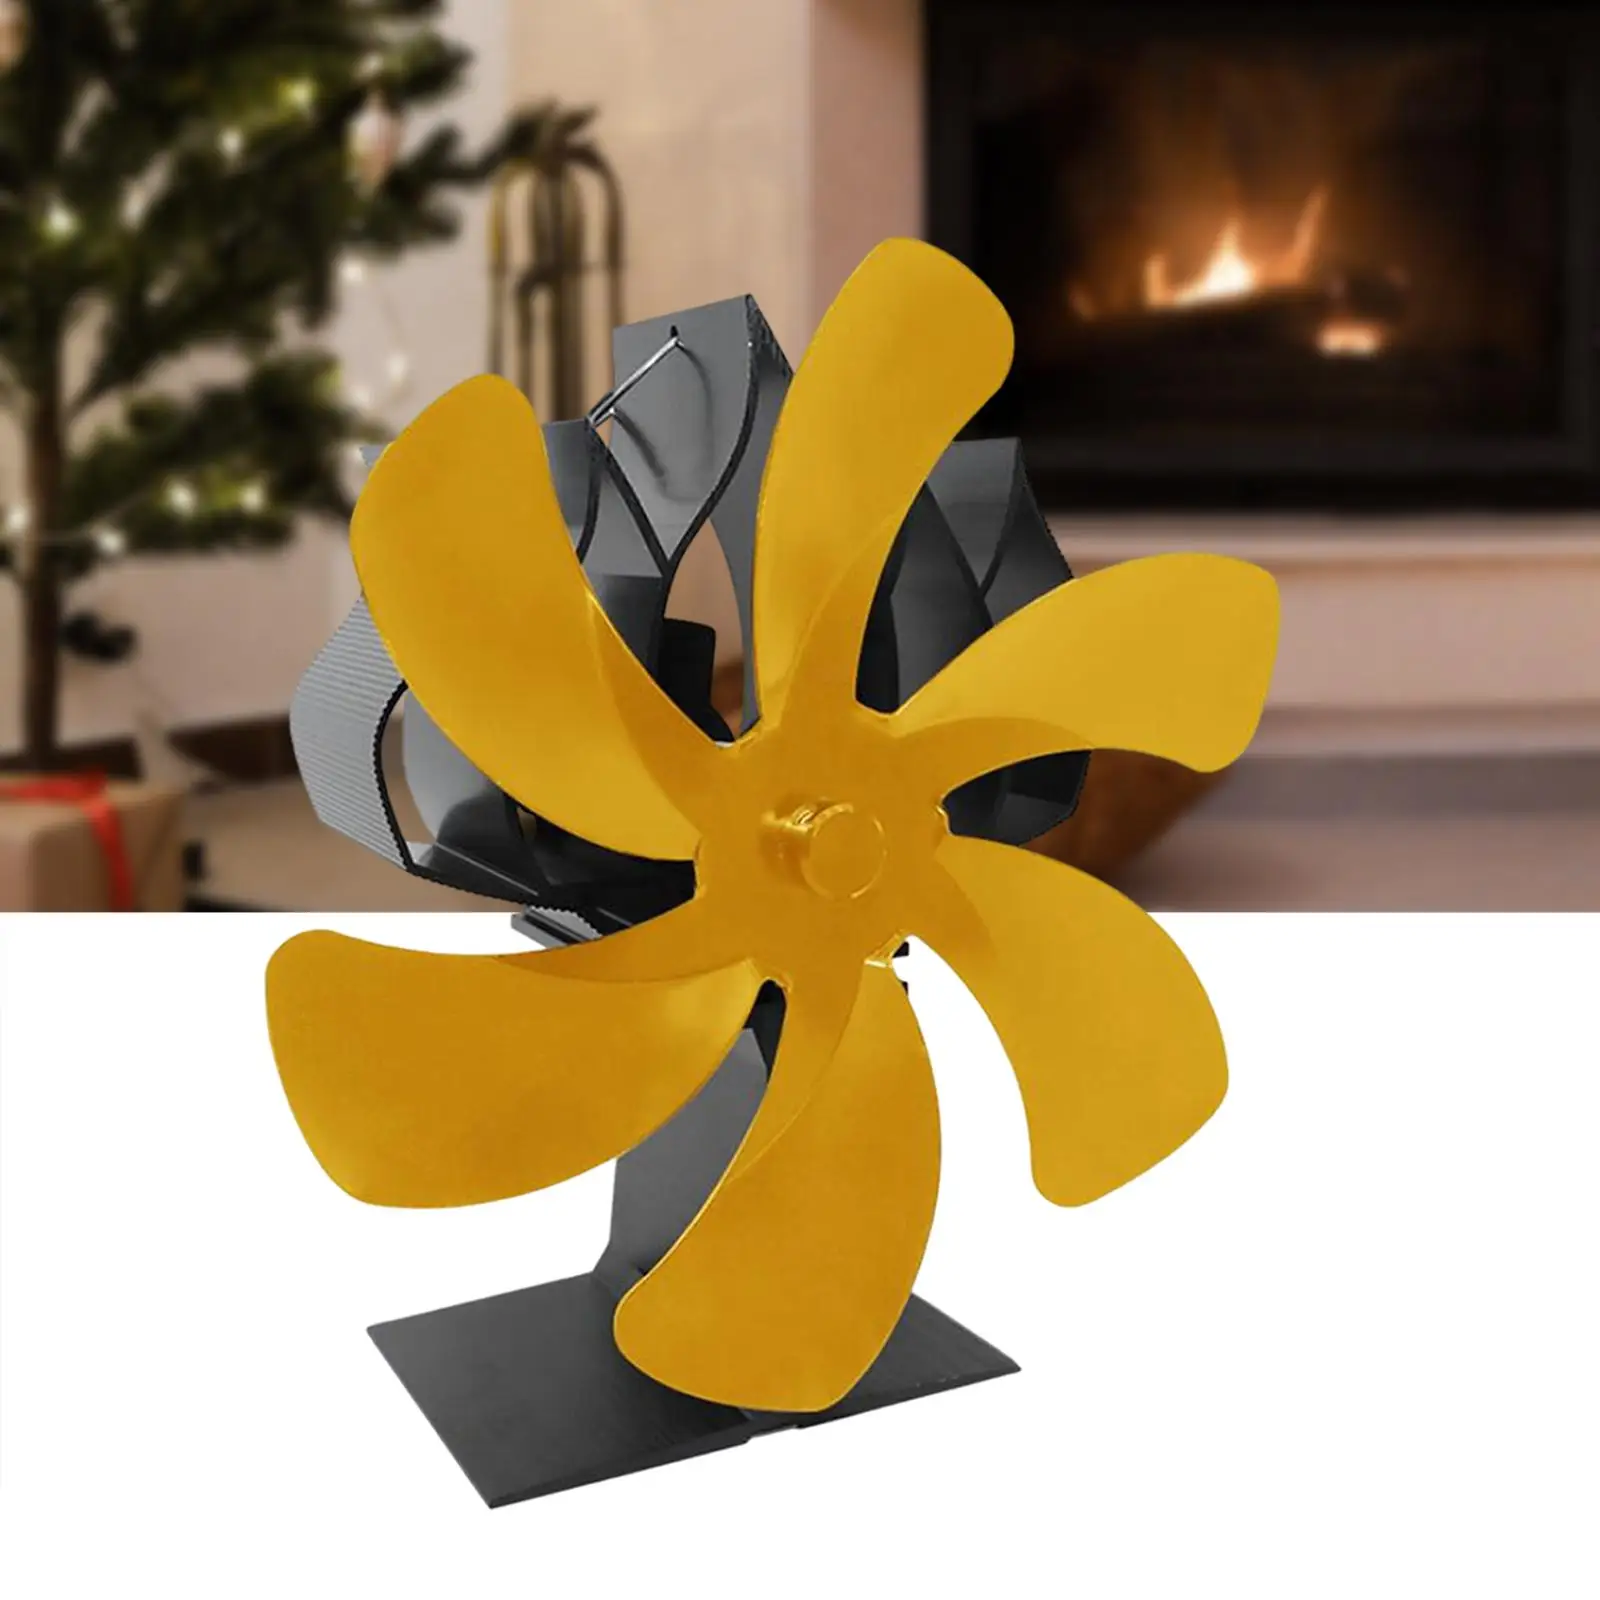 6 Vanes Hot Powered Fan Mute Efficient Hot Transfer Circulating Warm Air Household Fireplace Fan for Stoves Living Room